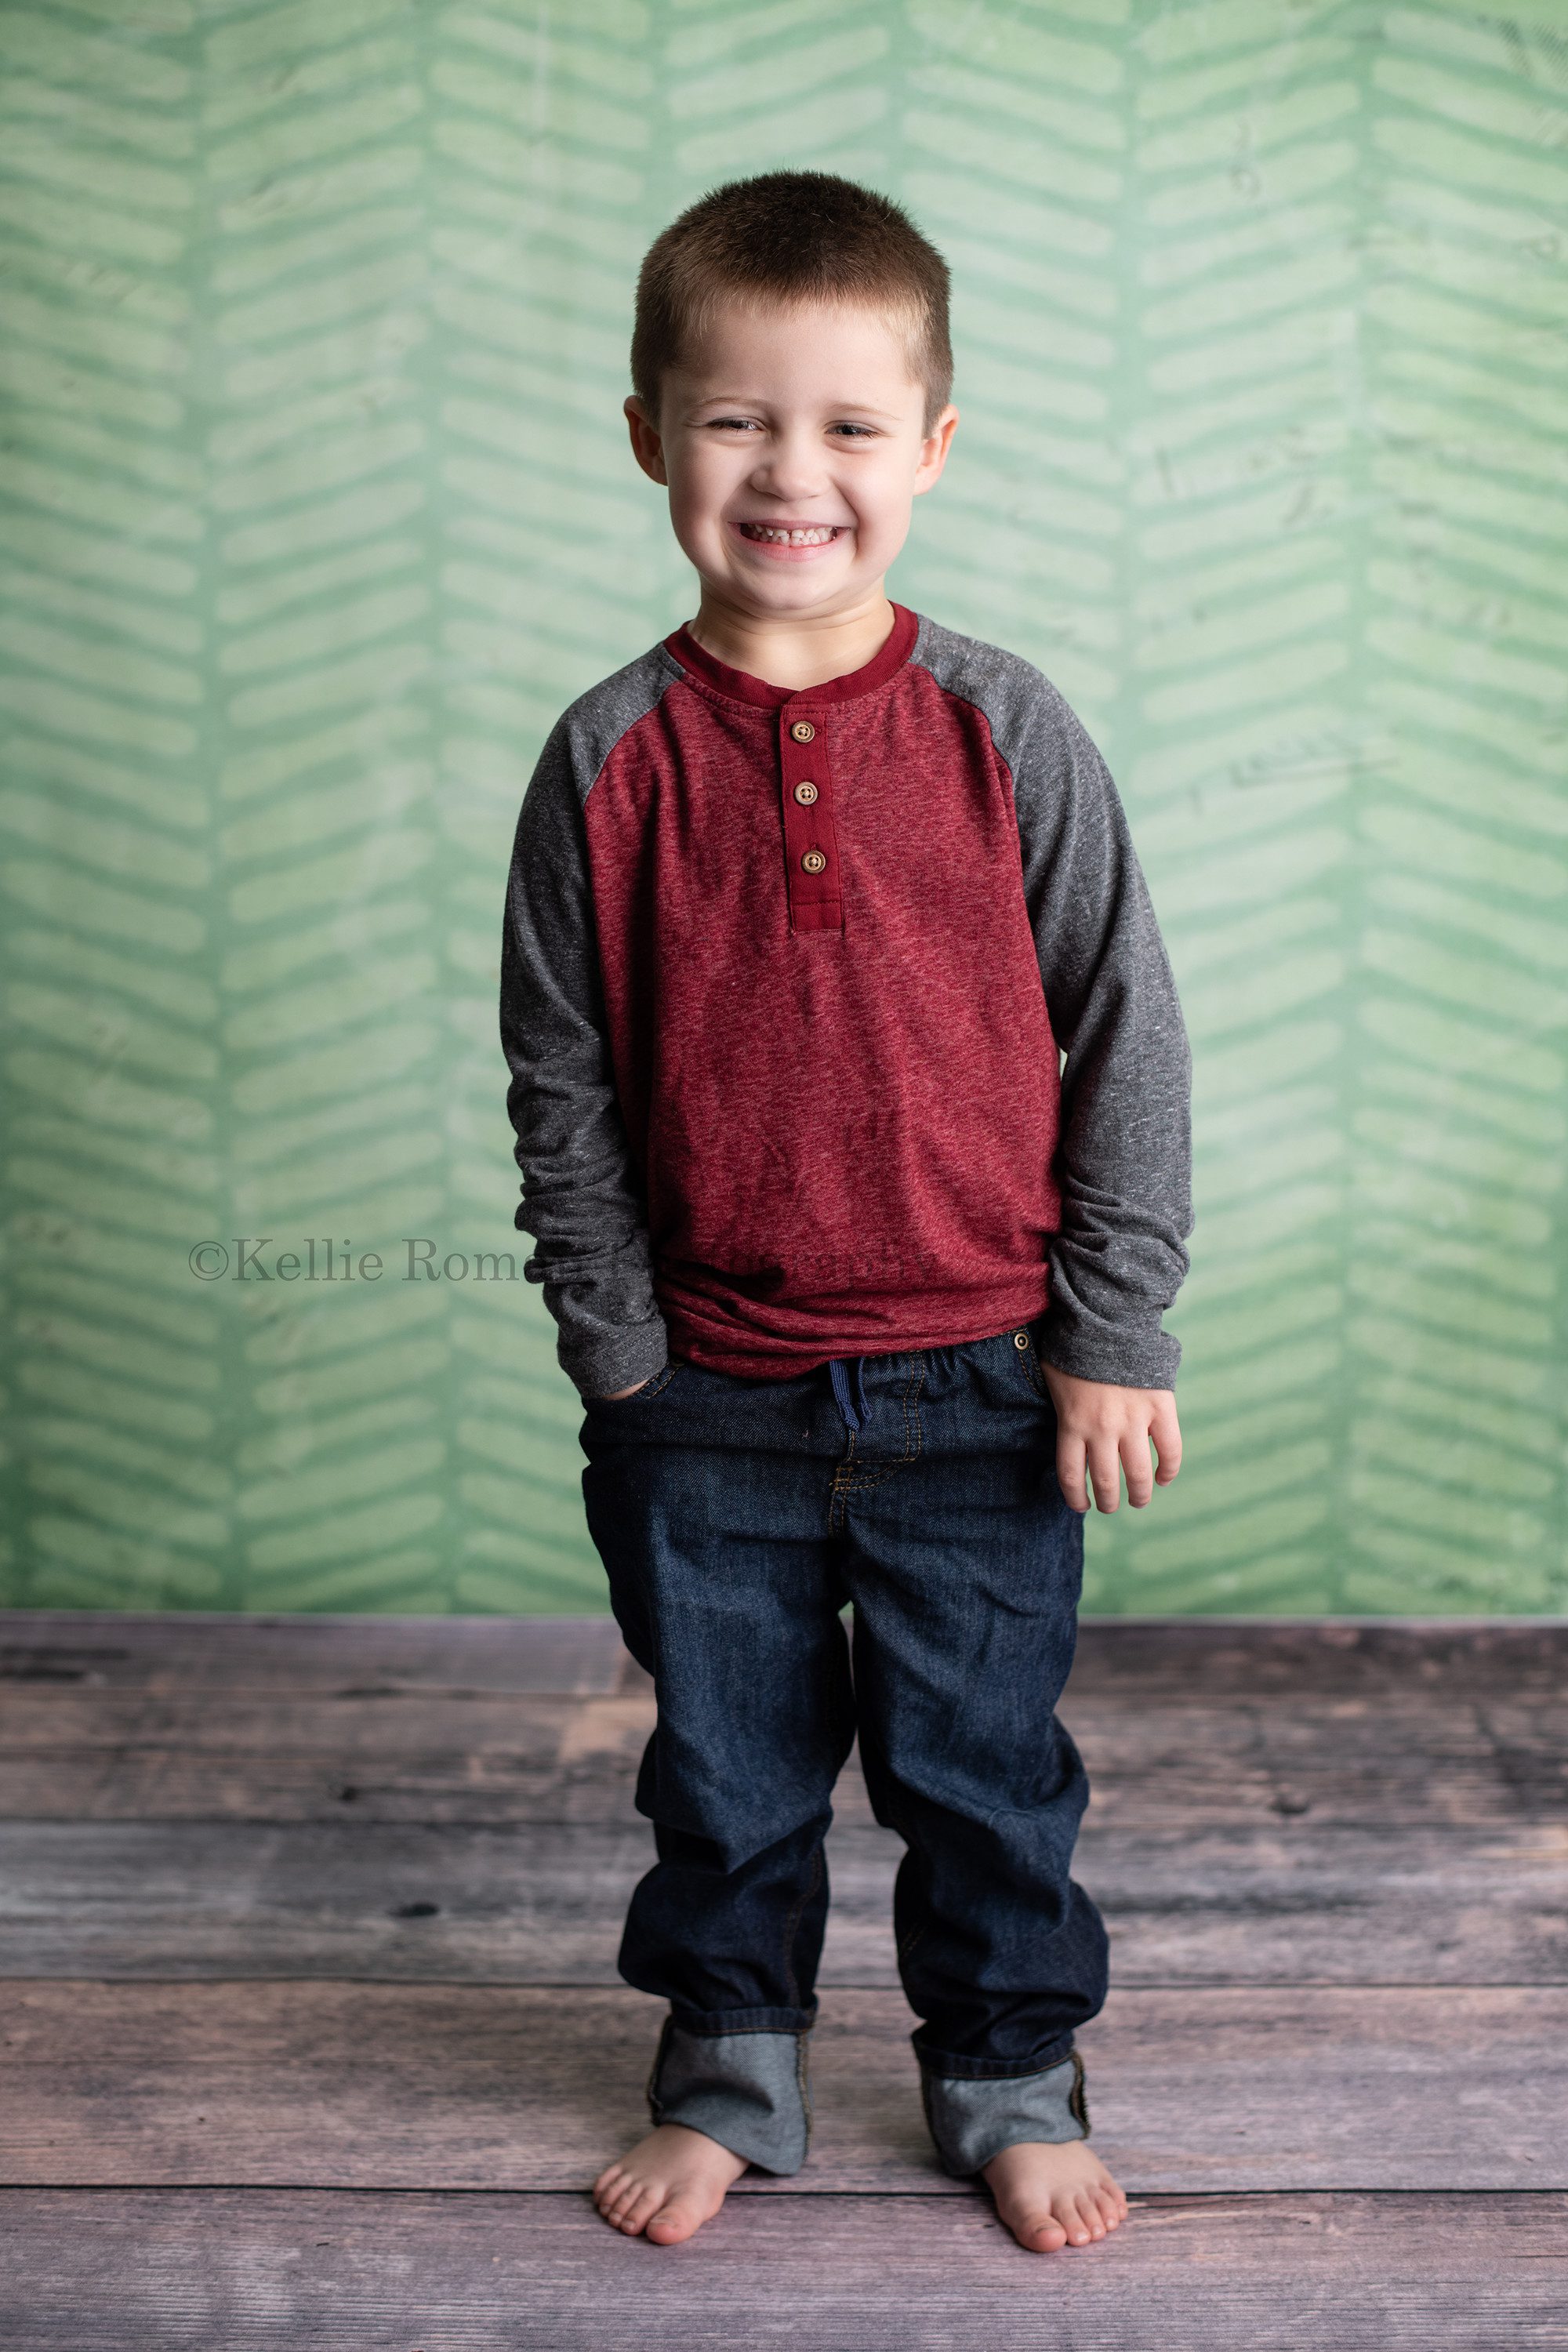 milwaukee milestone photographer a young boy in milwaukee photographers studio standing on dark wood floor with a green chevron backdrop he's wearing jeans that are cuffed and red and grey shirt he has his right hand in his pocket and is smiling really big